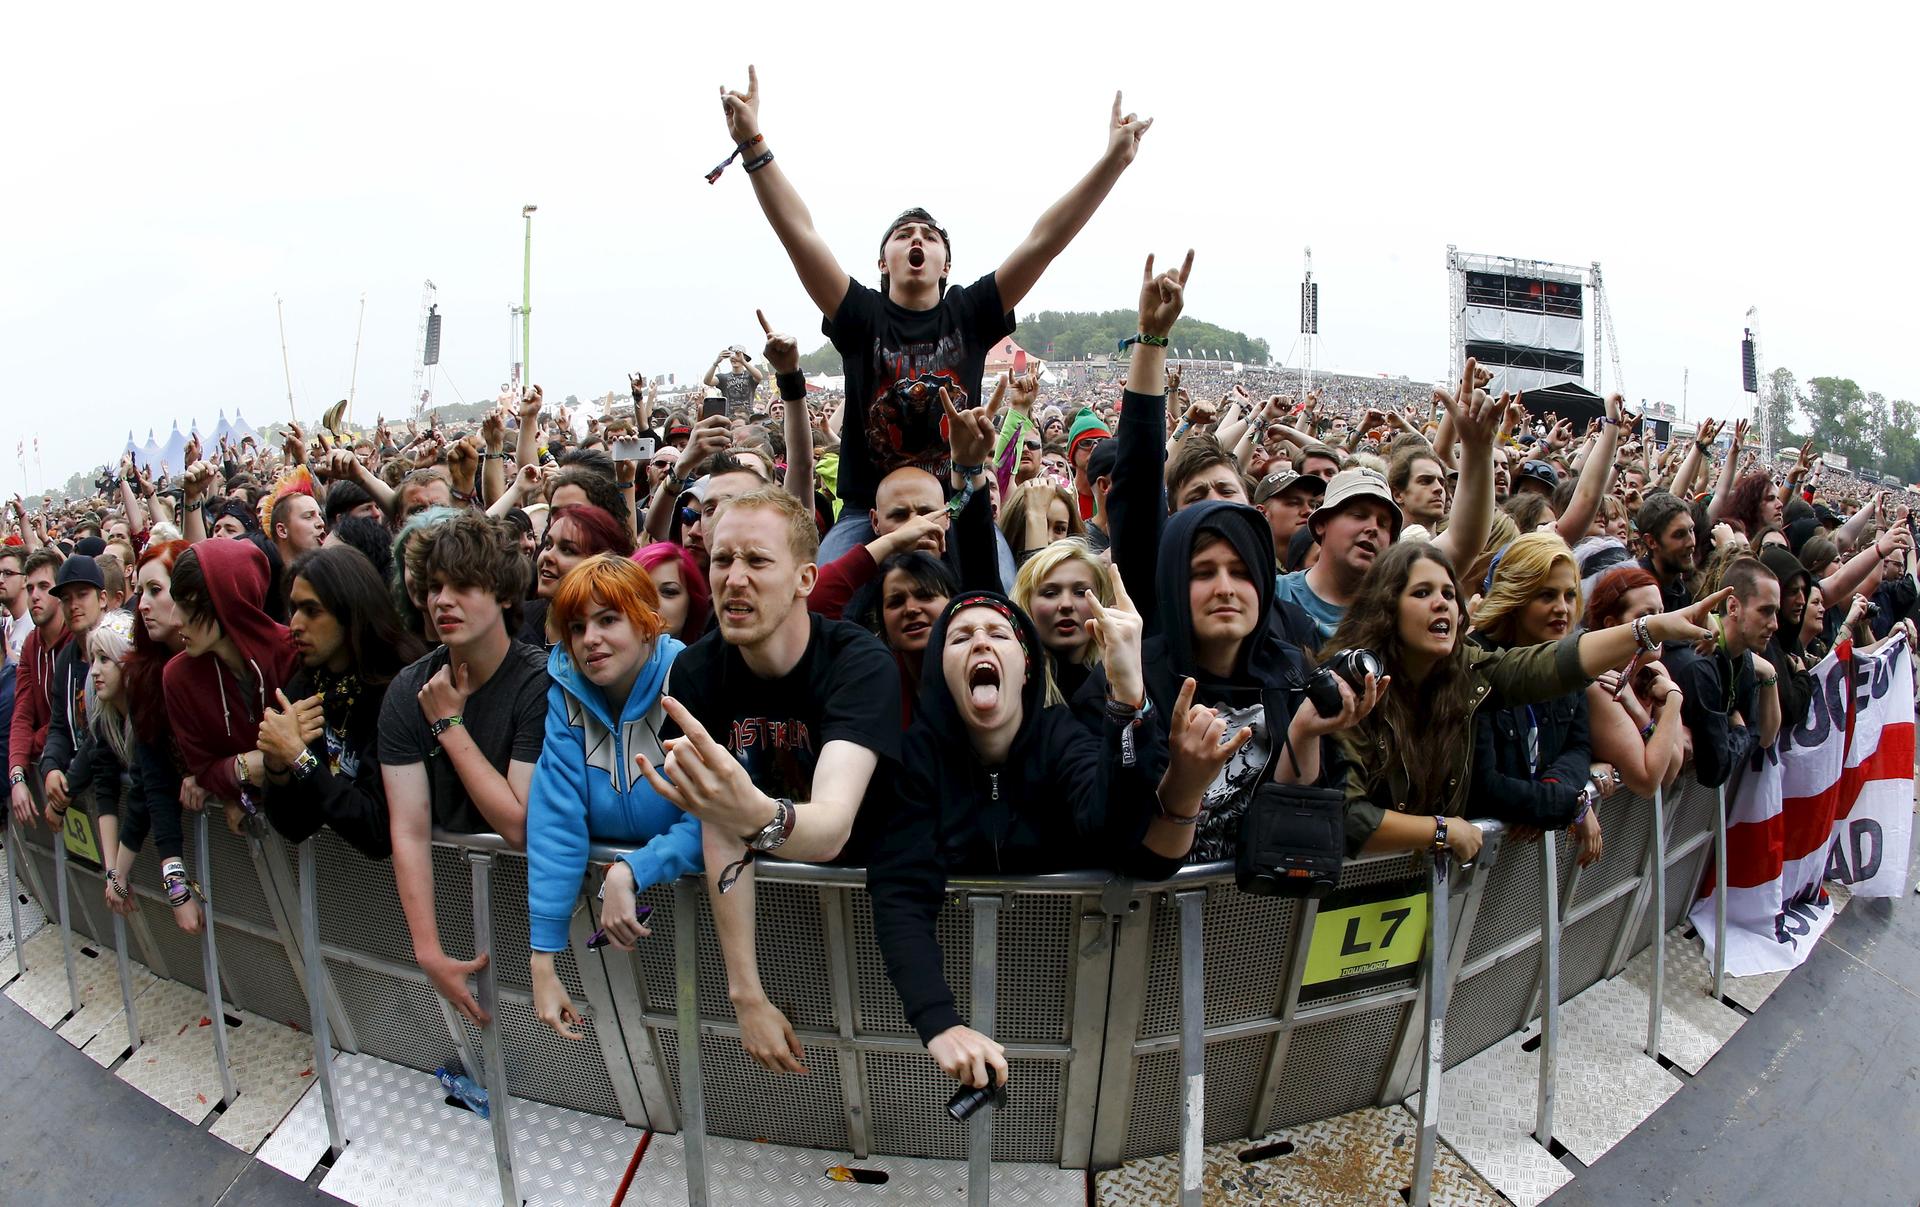 Fans at the Download Festival in Donington Park, Leicestershire, England